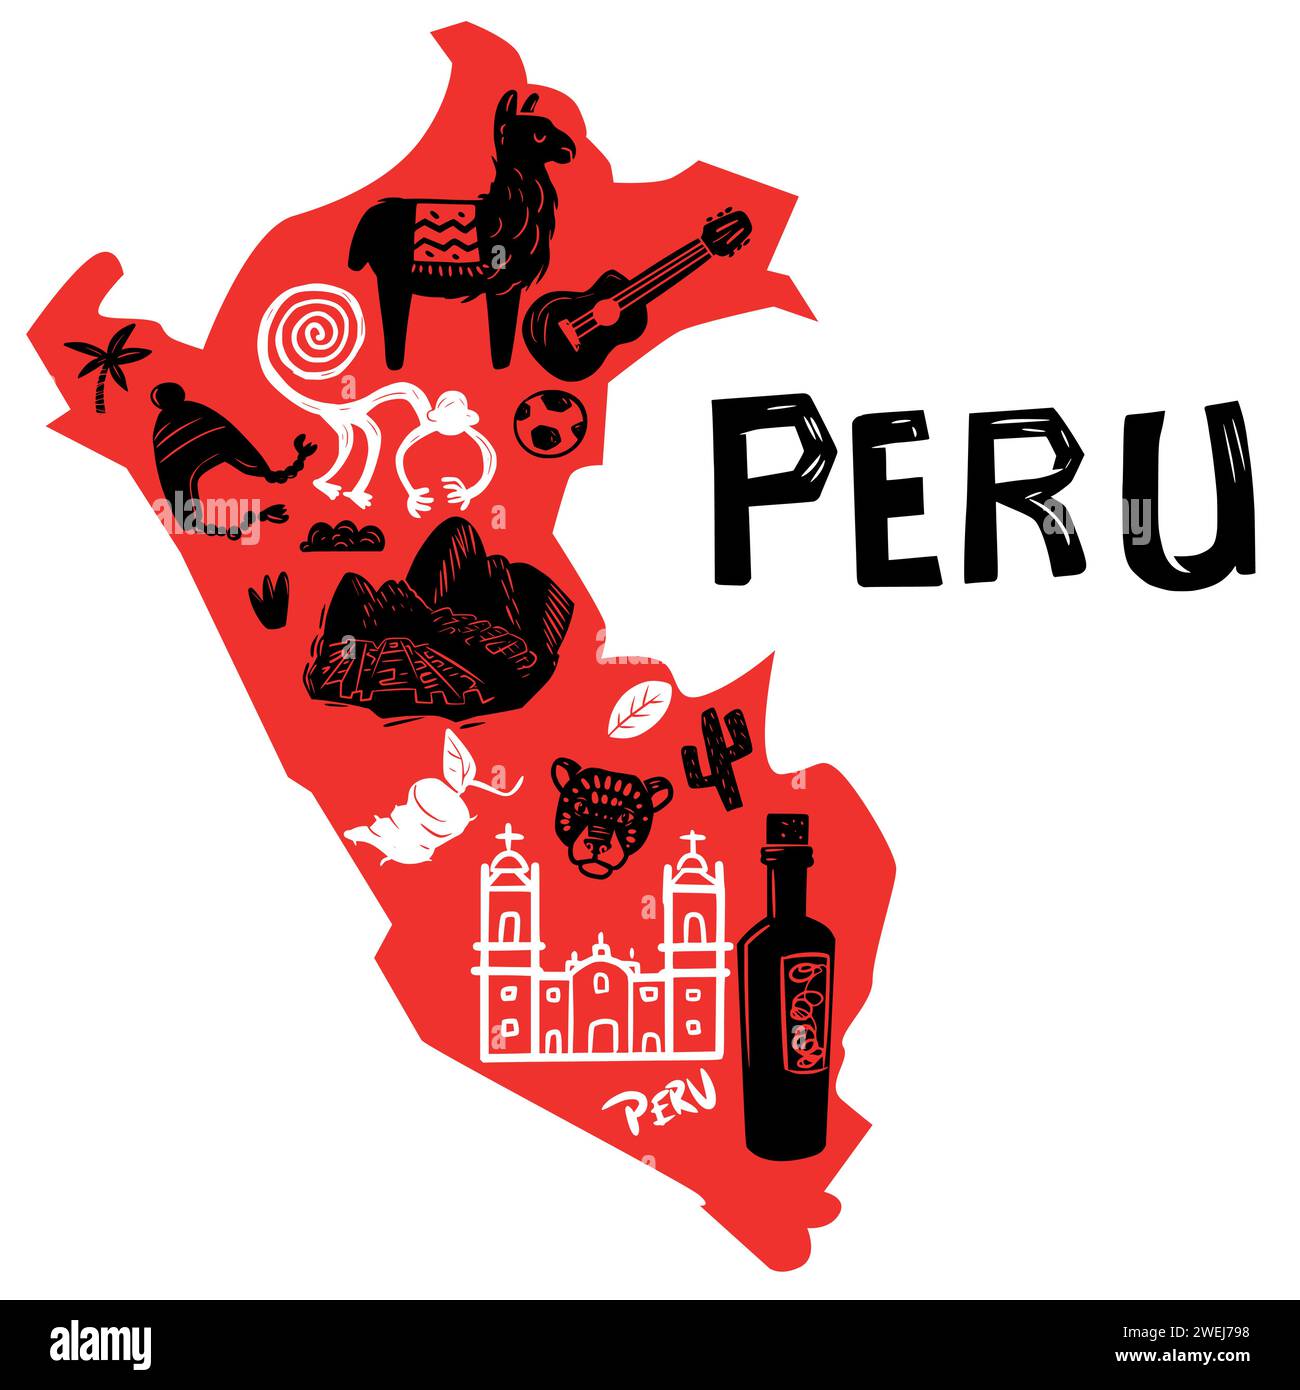 Peru vectorial stylized map Stock Vector